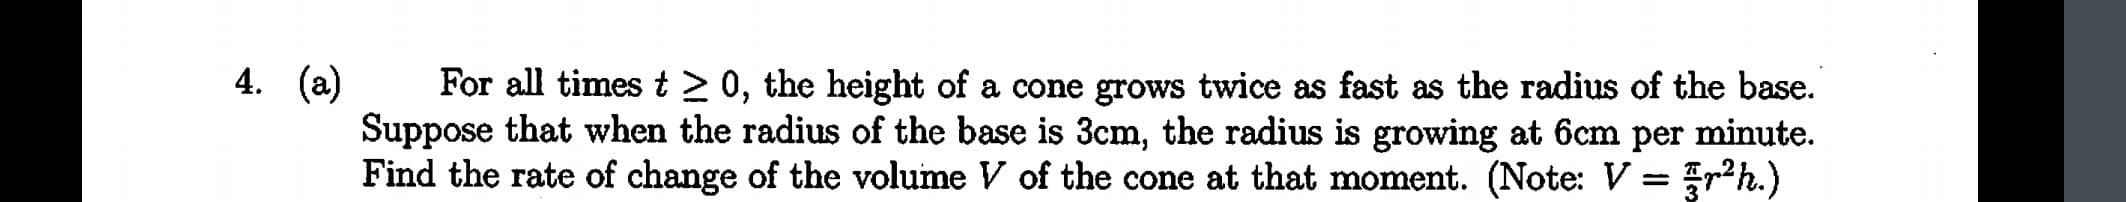 4. (a)
For all times t > 0, the height of a cone grows twice as fast as the radius of the base.
Suppose that when the radius of the base is 3cm, the radius is growing at 6cm per minute
Find the rate of change of the volume V of the cone at that moment. (Note: V = Sr2h.)
